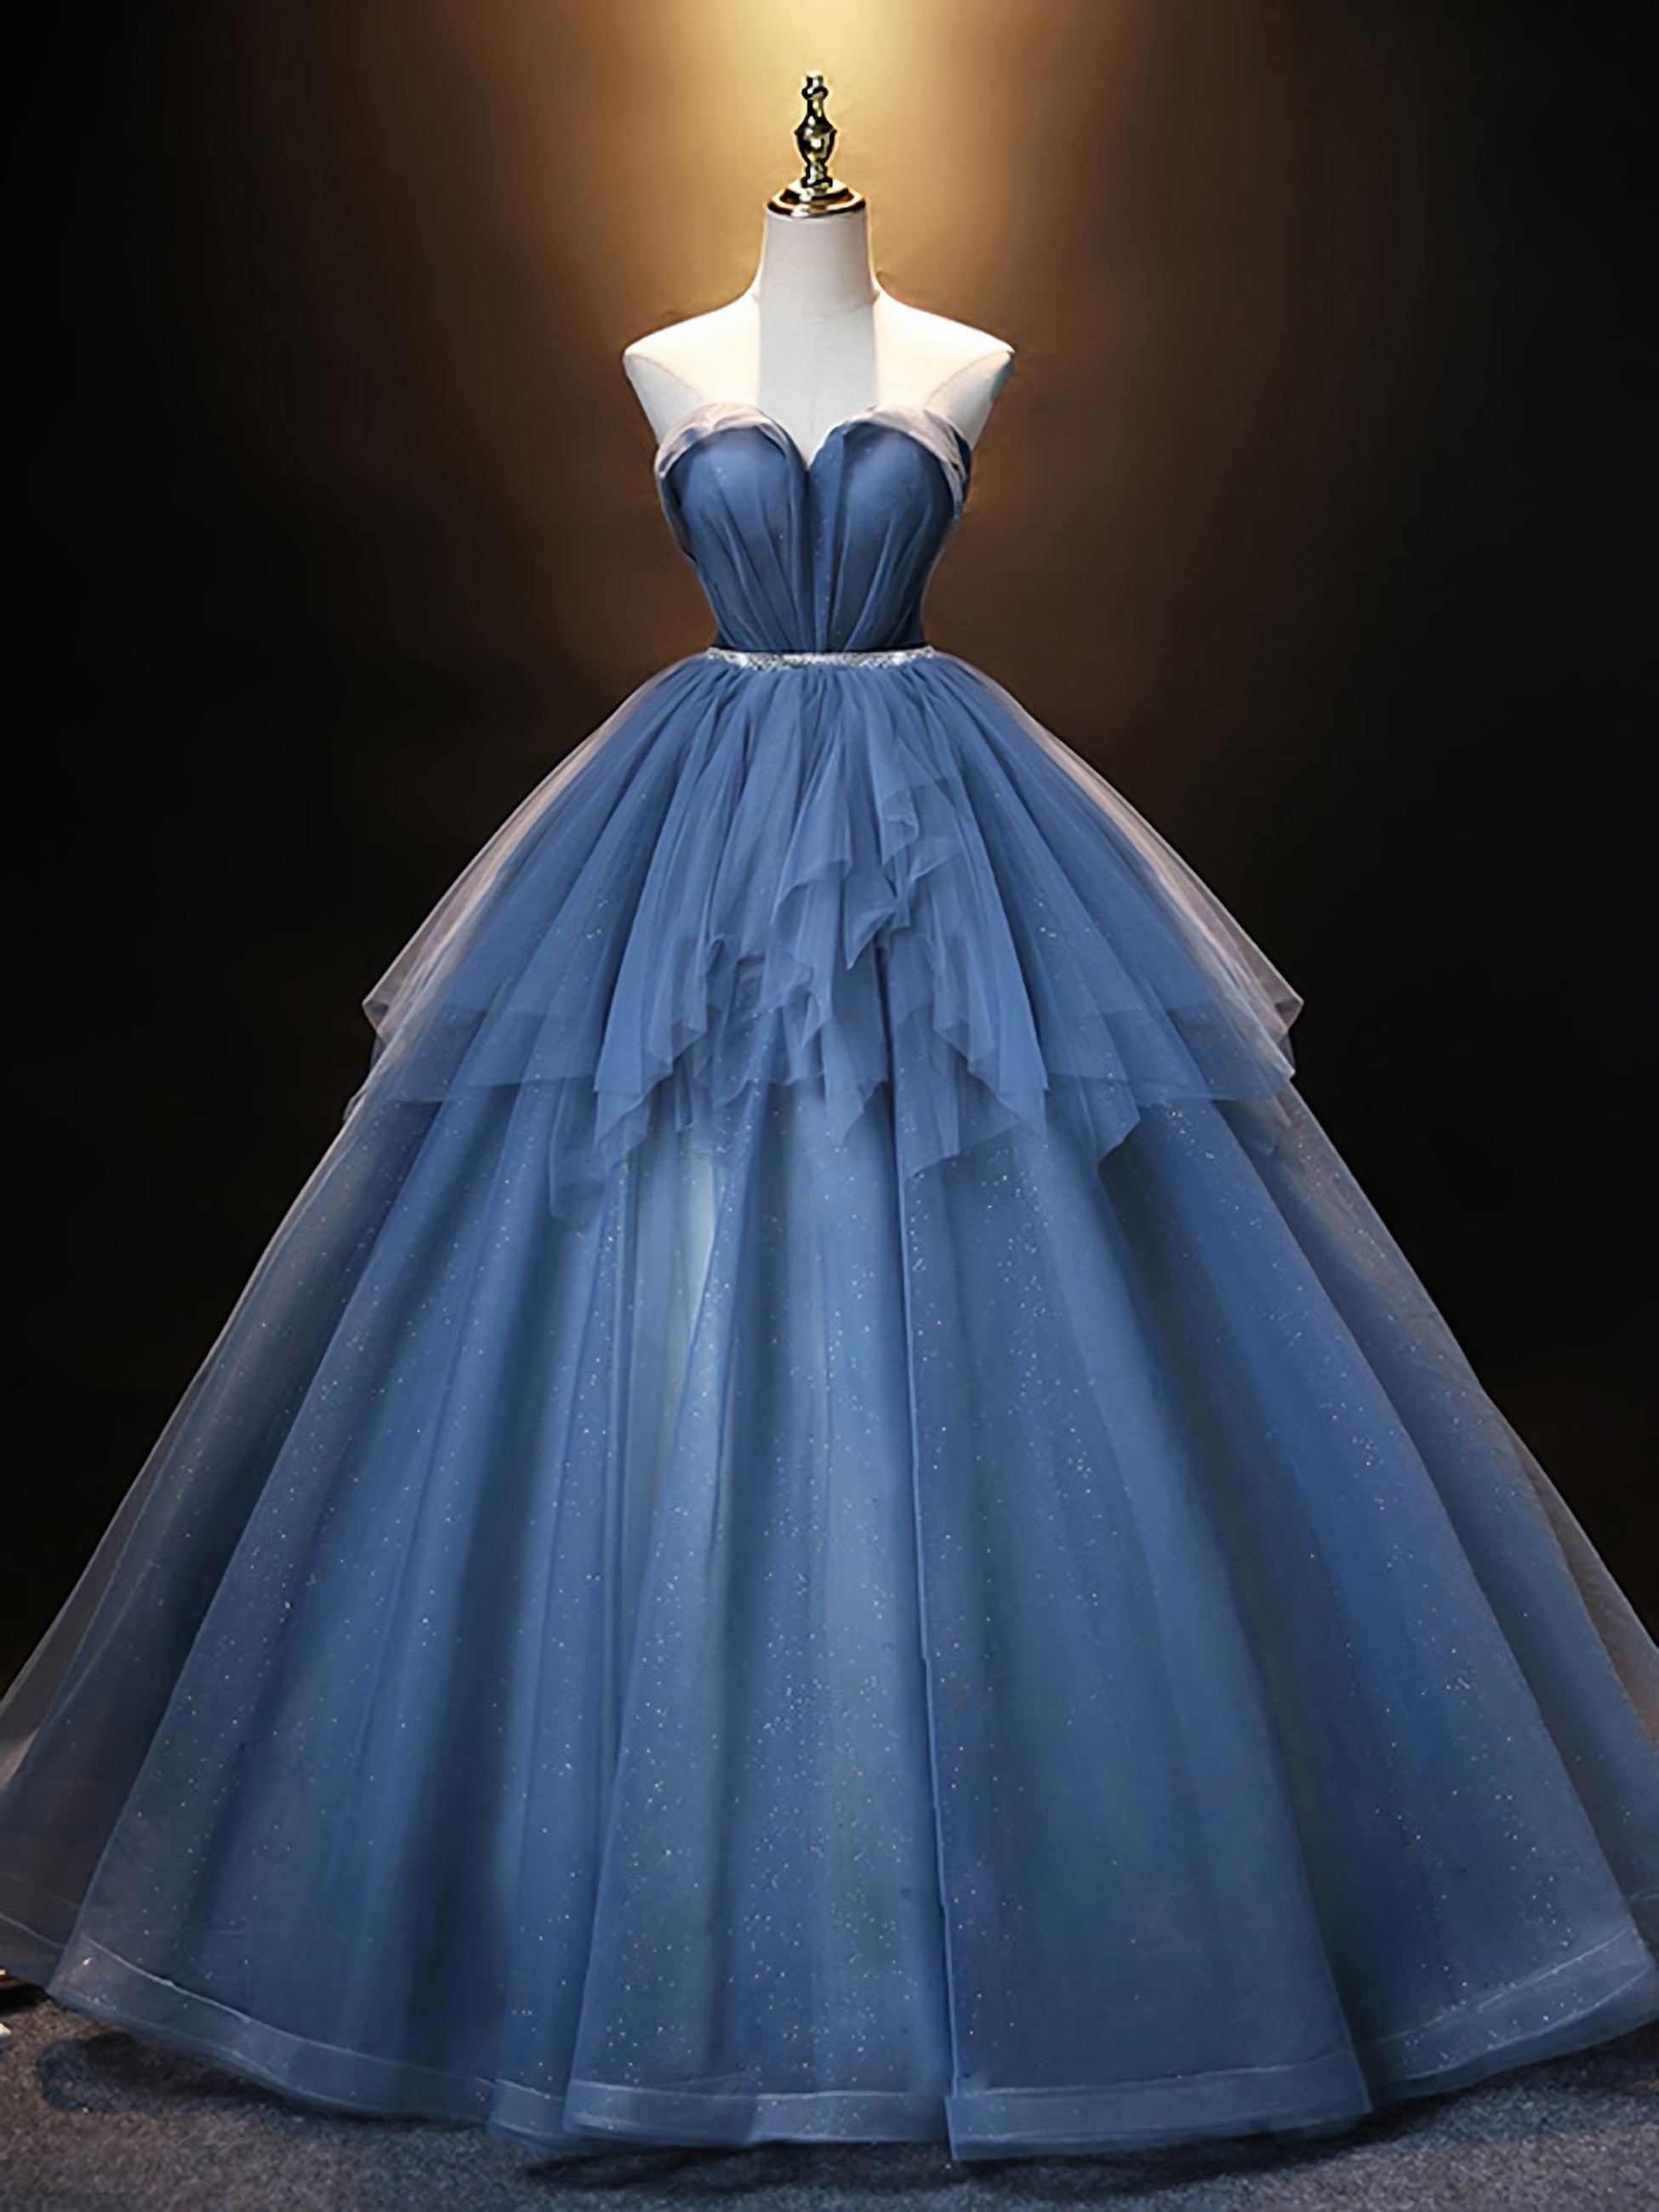 Blue Sweetheart Neck Tulle Long Corset Prom Dress, Blue Evening Dress outfit, Prom Dresses Brand